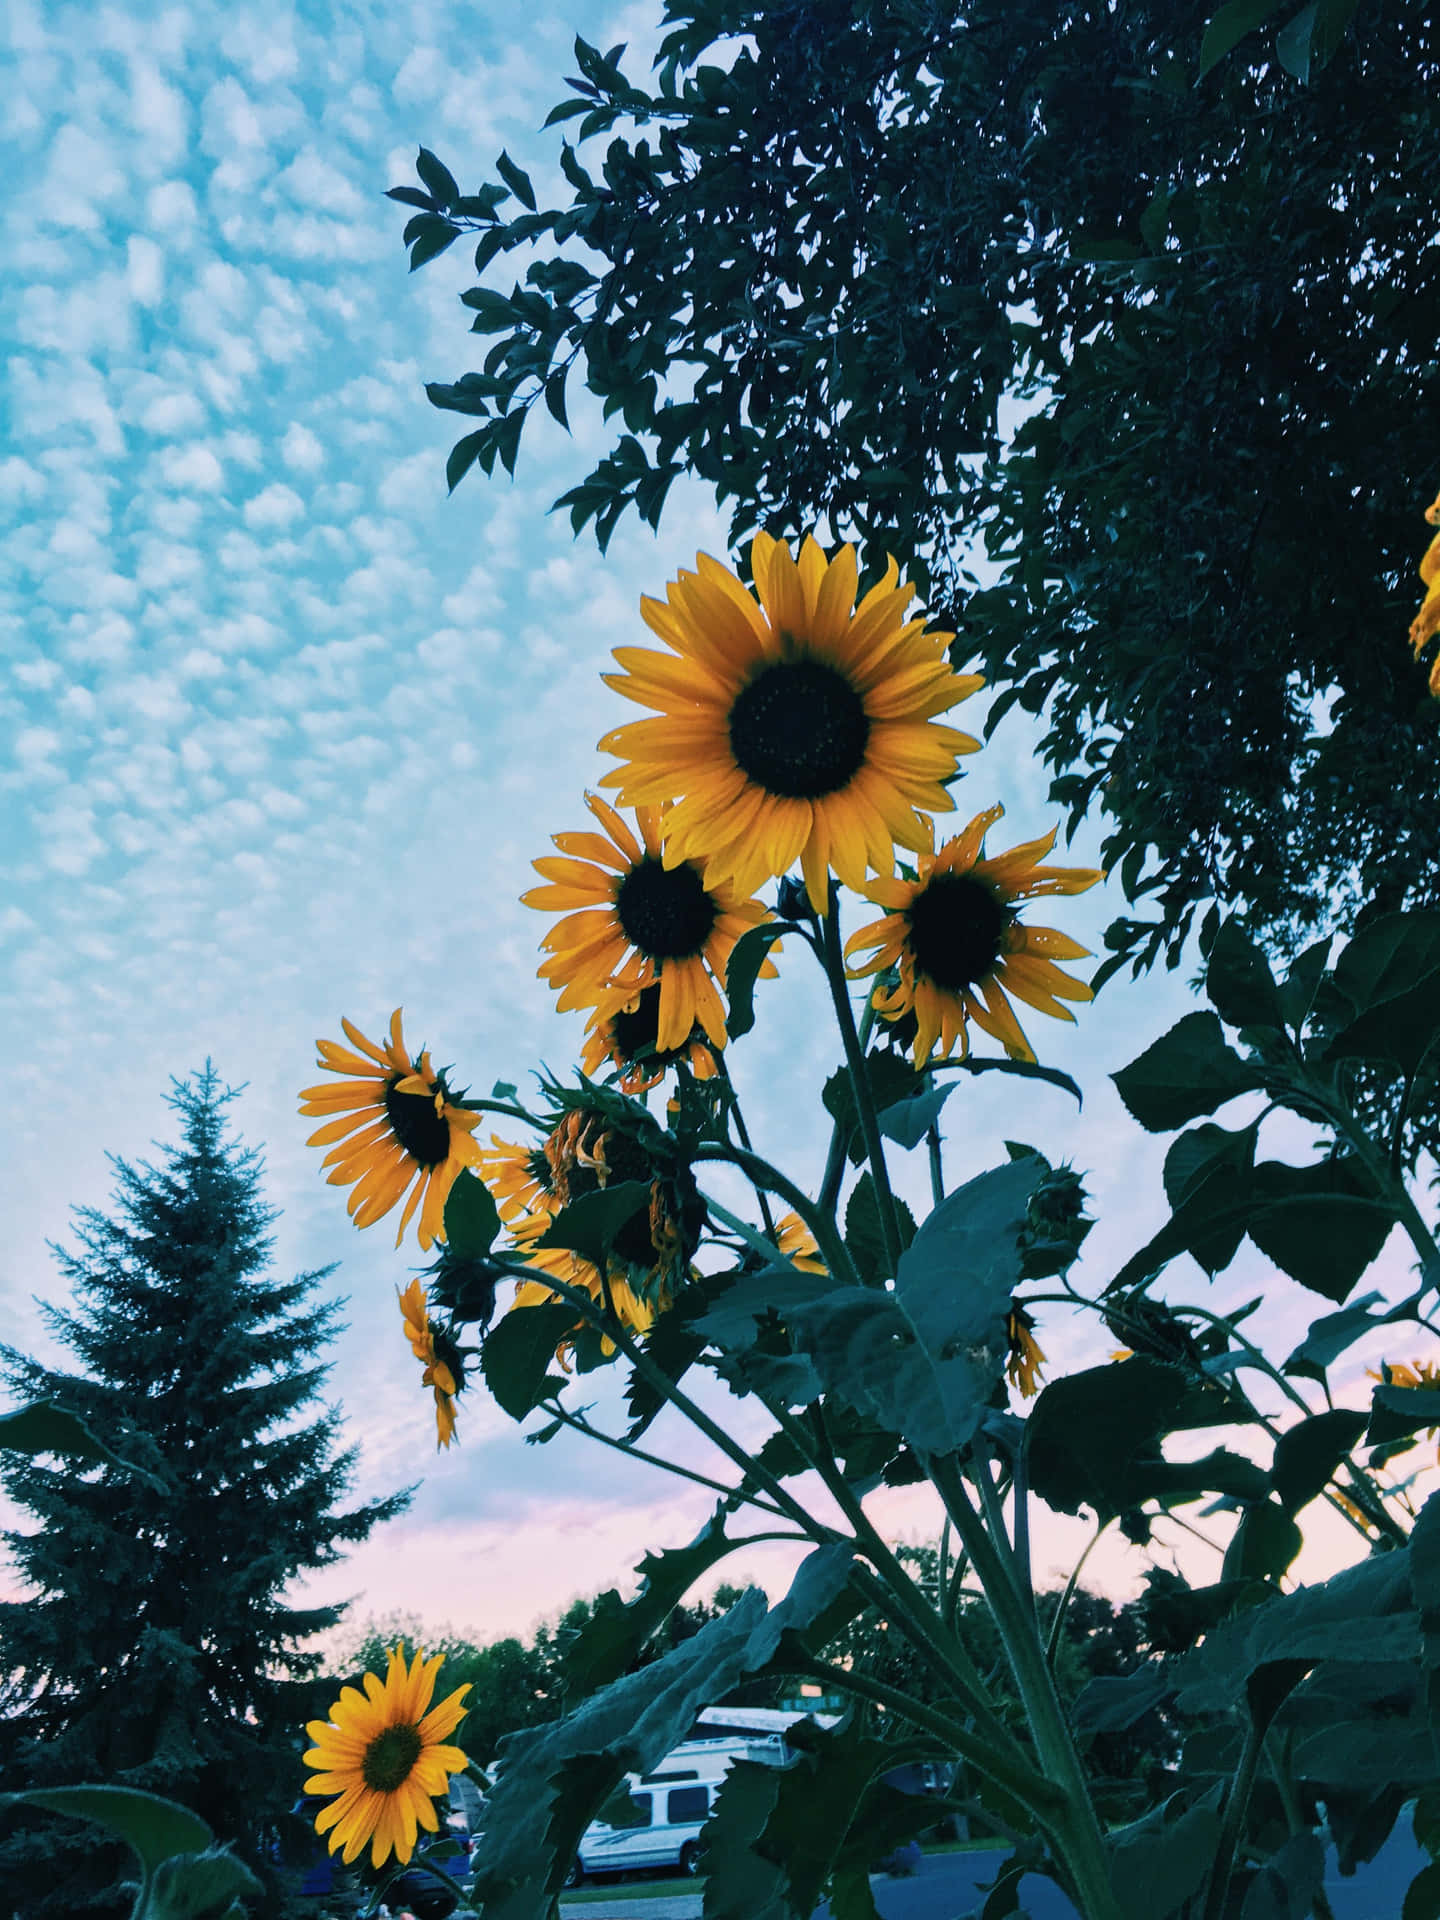 Enjoy the beauty of the sunflower with this Aesthetic iPhone wallpaper. Wallpaper